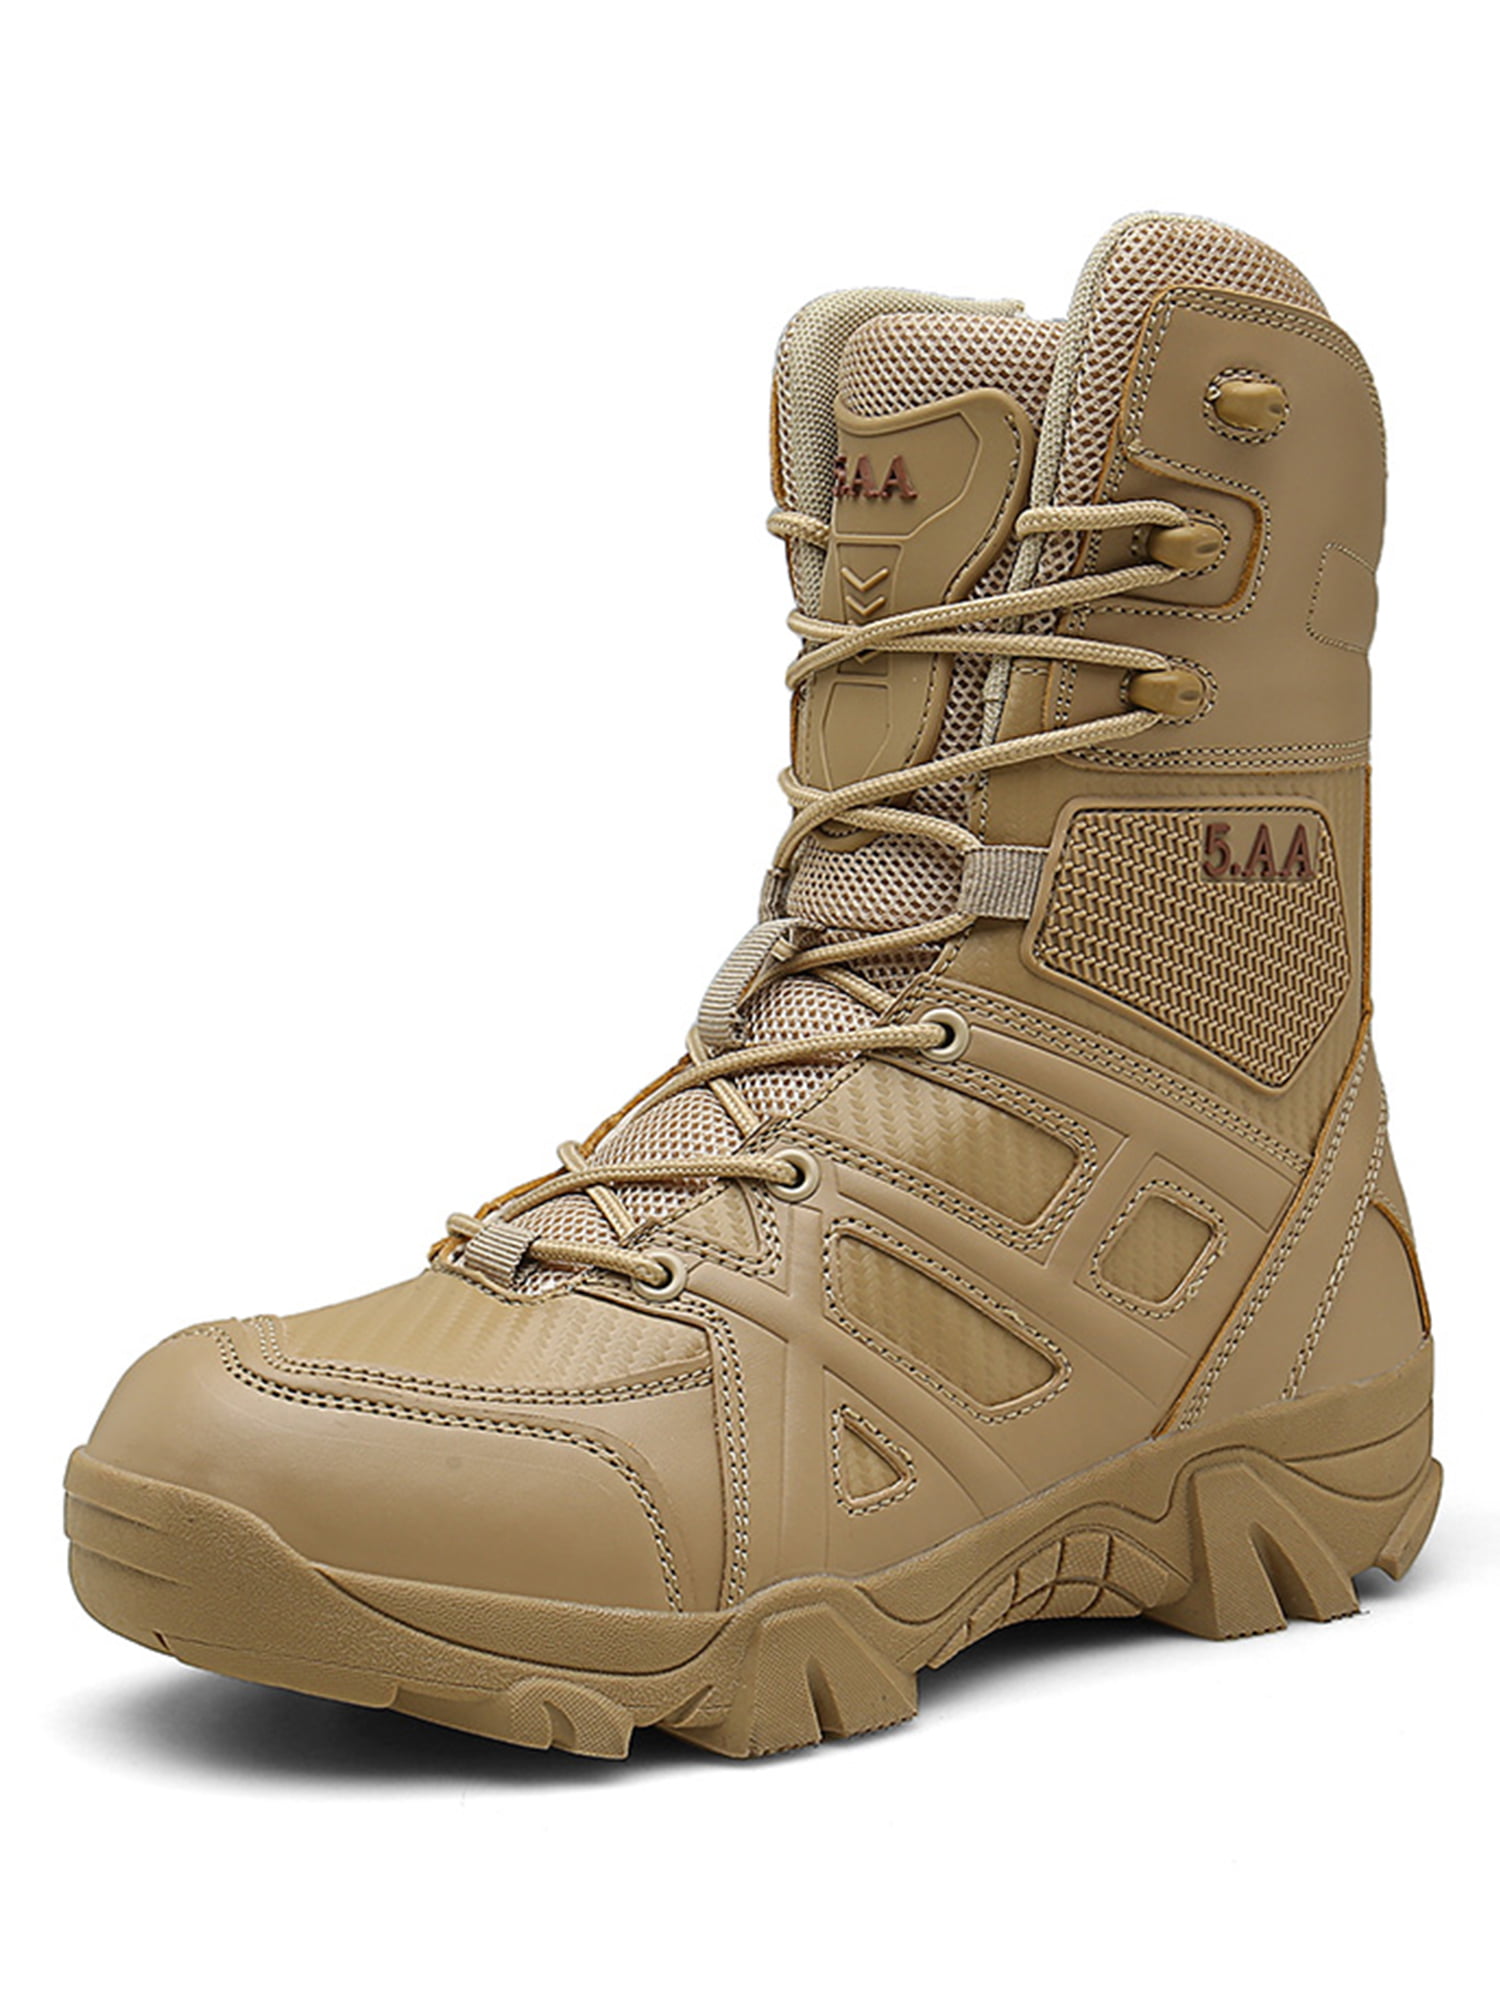 Mens High Top Military Tactical Boots Desert Army Hiking Combat Ankle Boots 2019